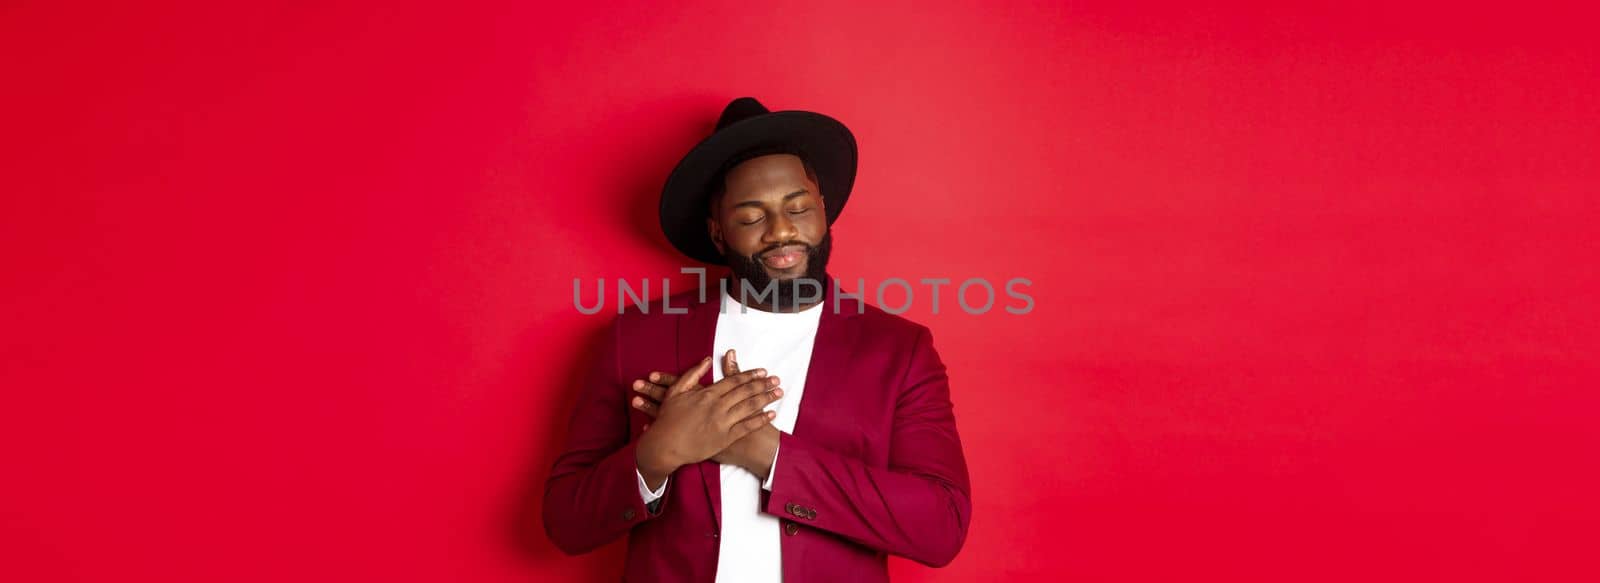 Fashion and party concept. Young bearded Black man in classy hat and jacket, holding hands on heart and smiling nostalgic, remember something, daydreaming against red background.